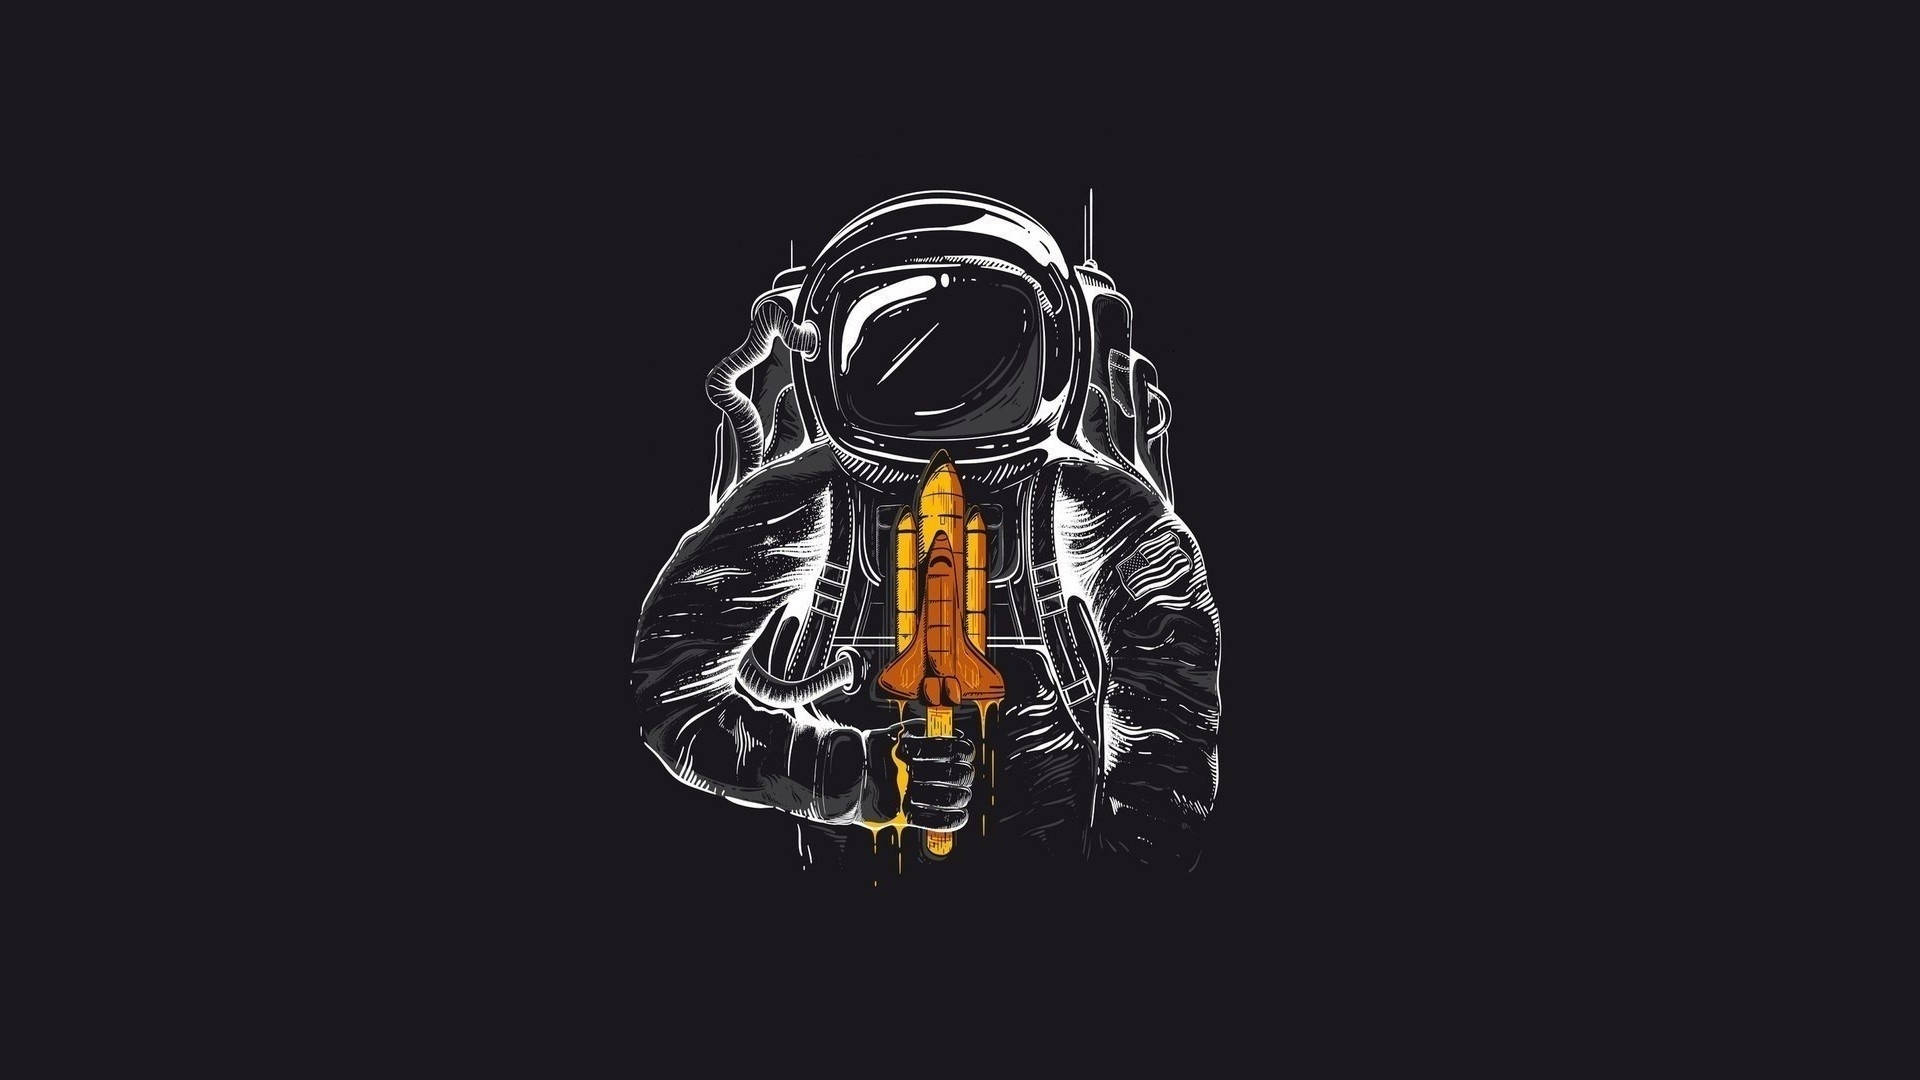 Rocket 1920X1080 Wallpaper and Background Image